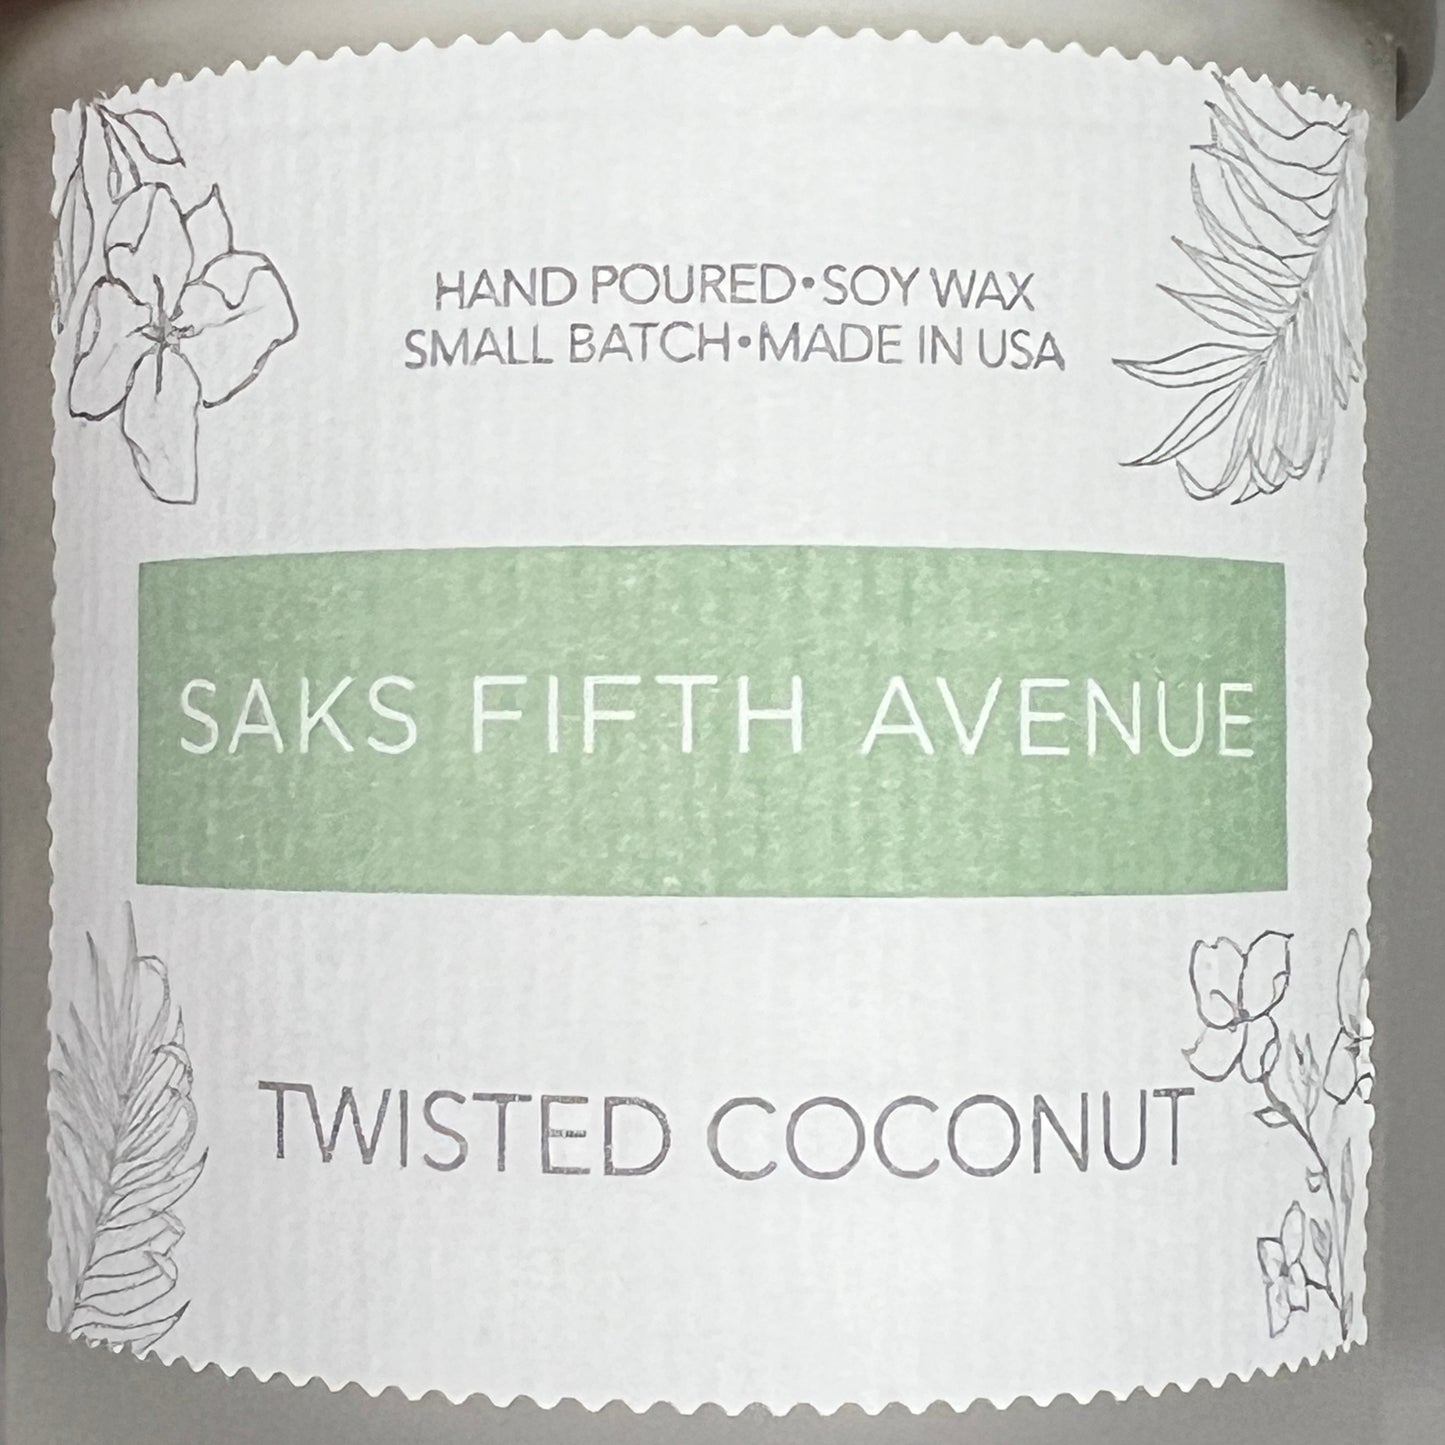 SAKS FIFTH AVENUE Twisted Coconut Hand Poured Soy Wax Candle 8 fl oz (New)